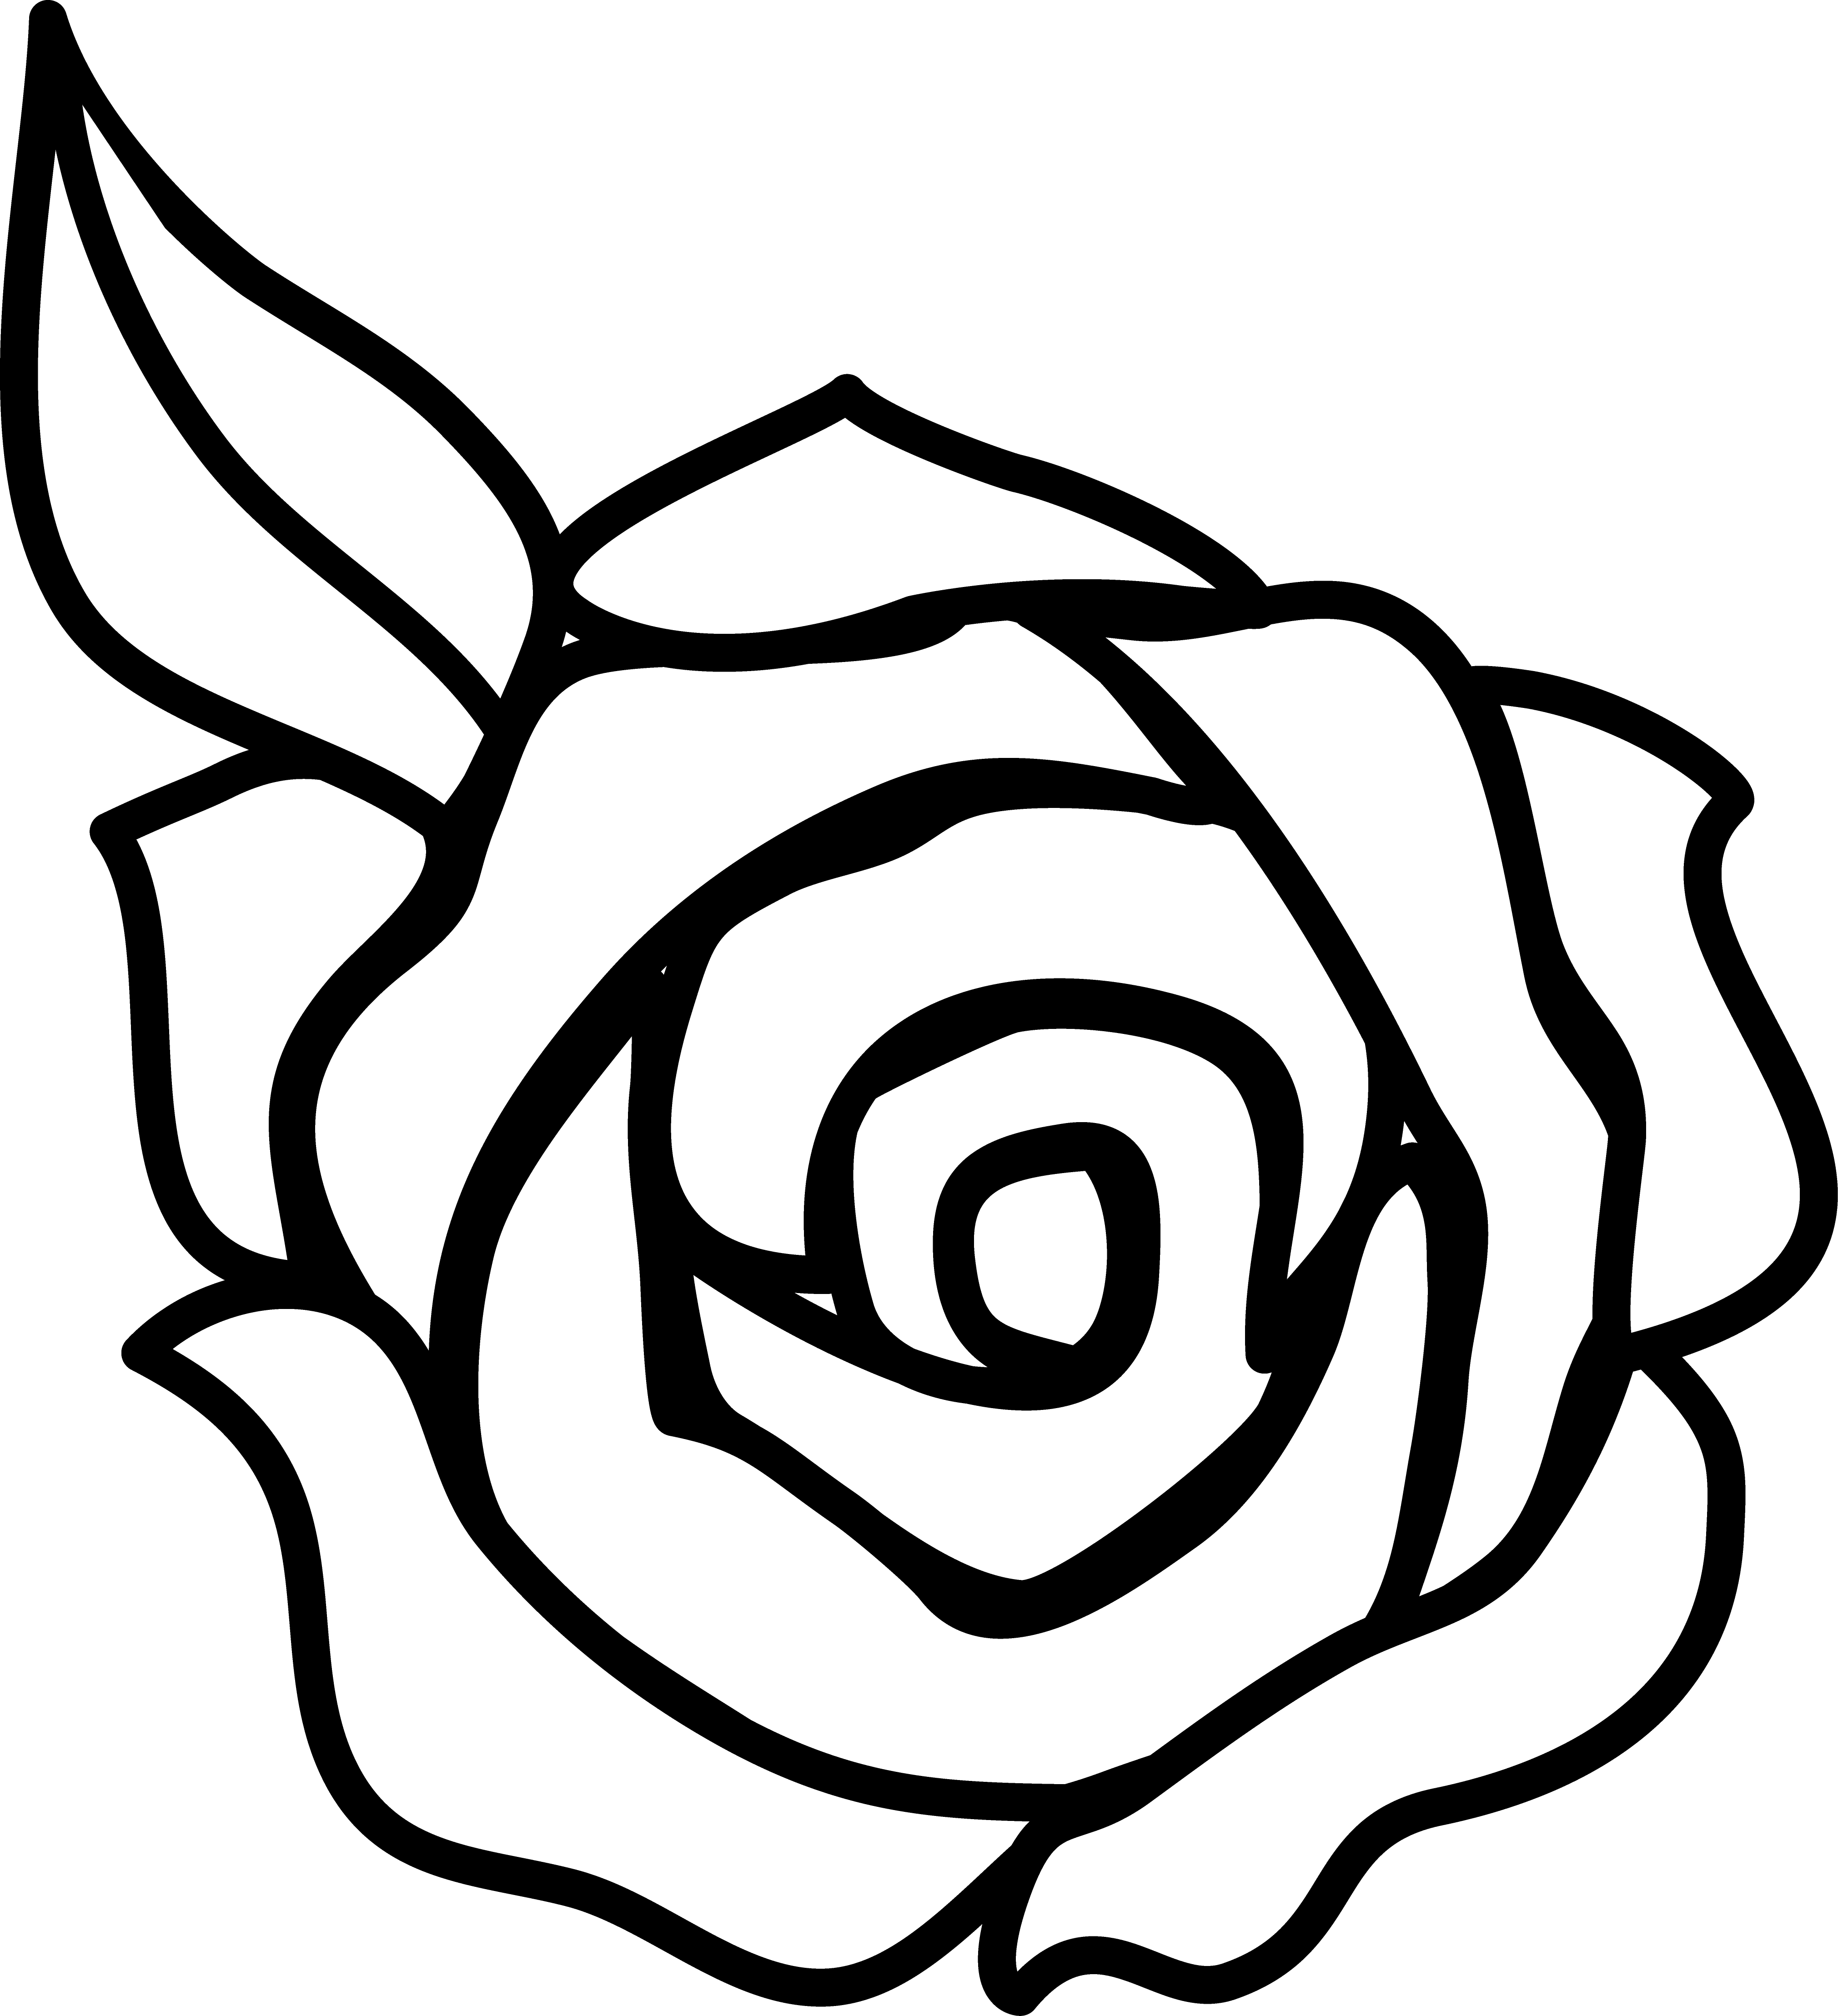 Flower outline png. Black and white rose